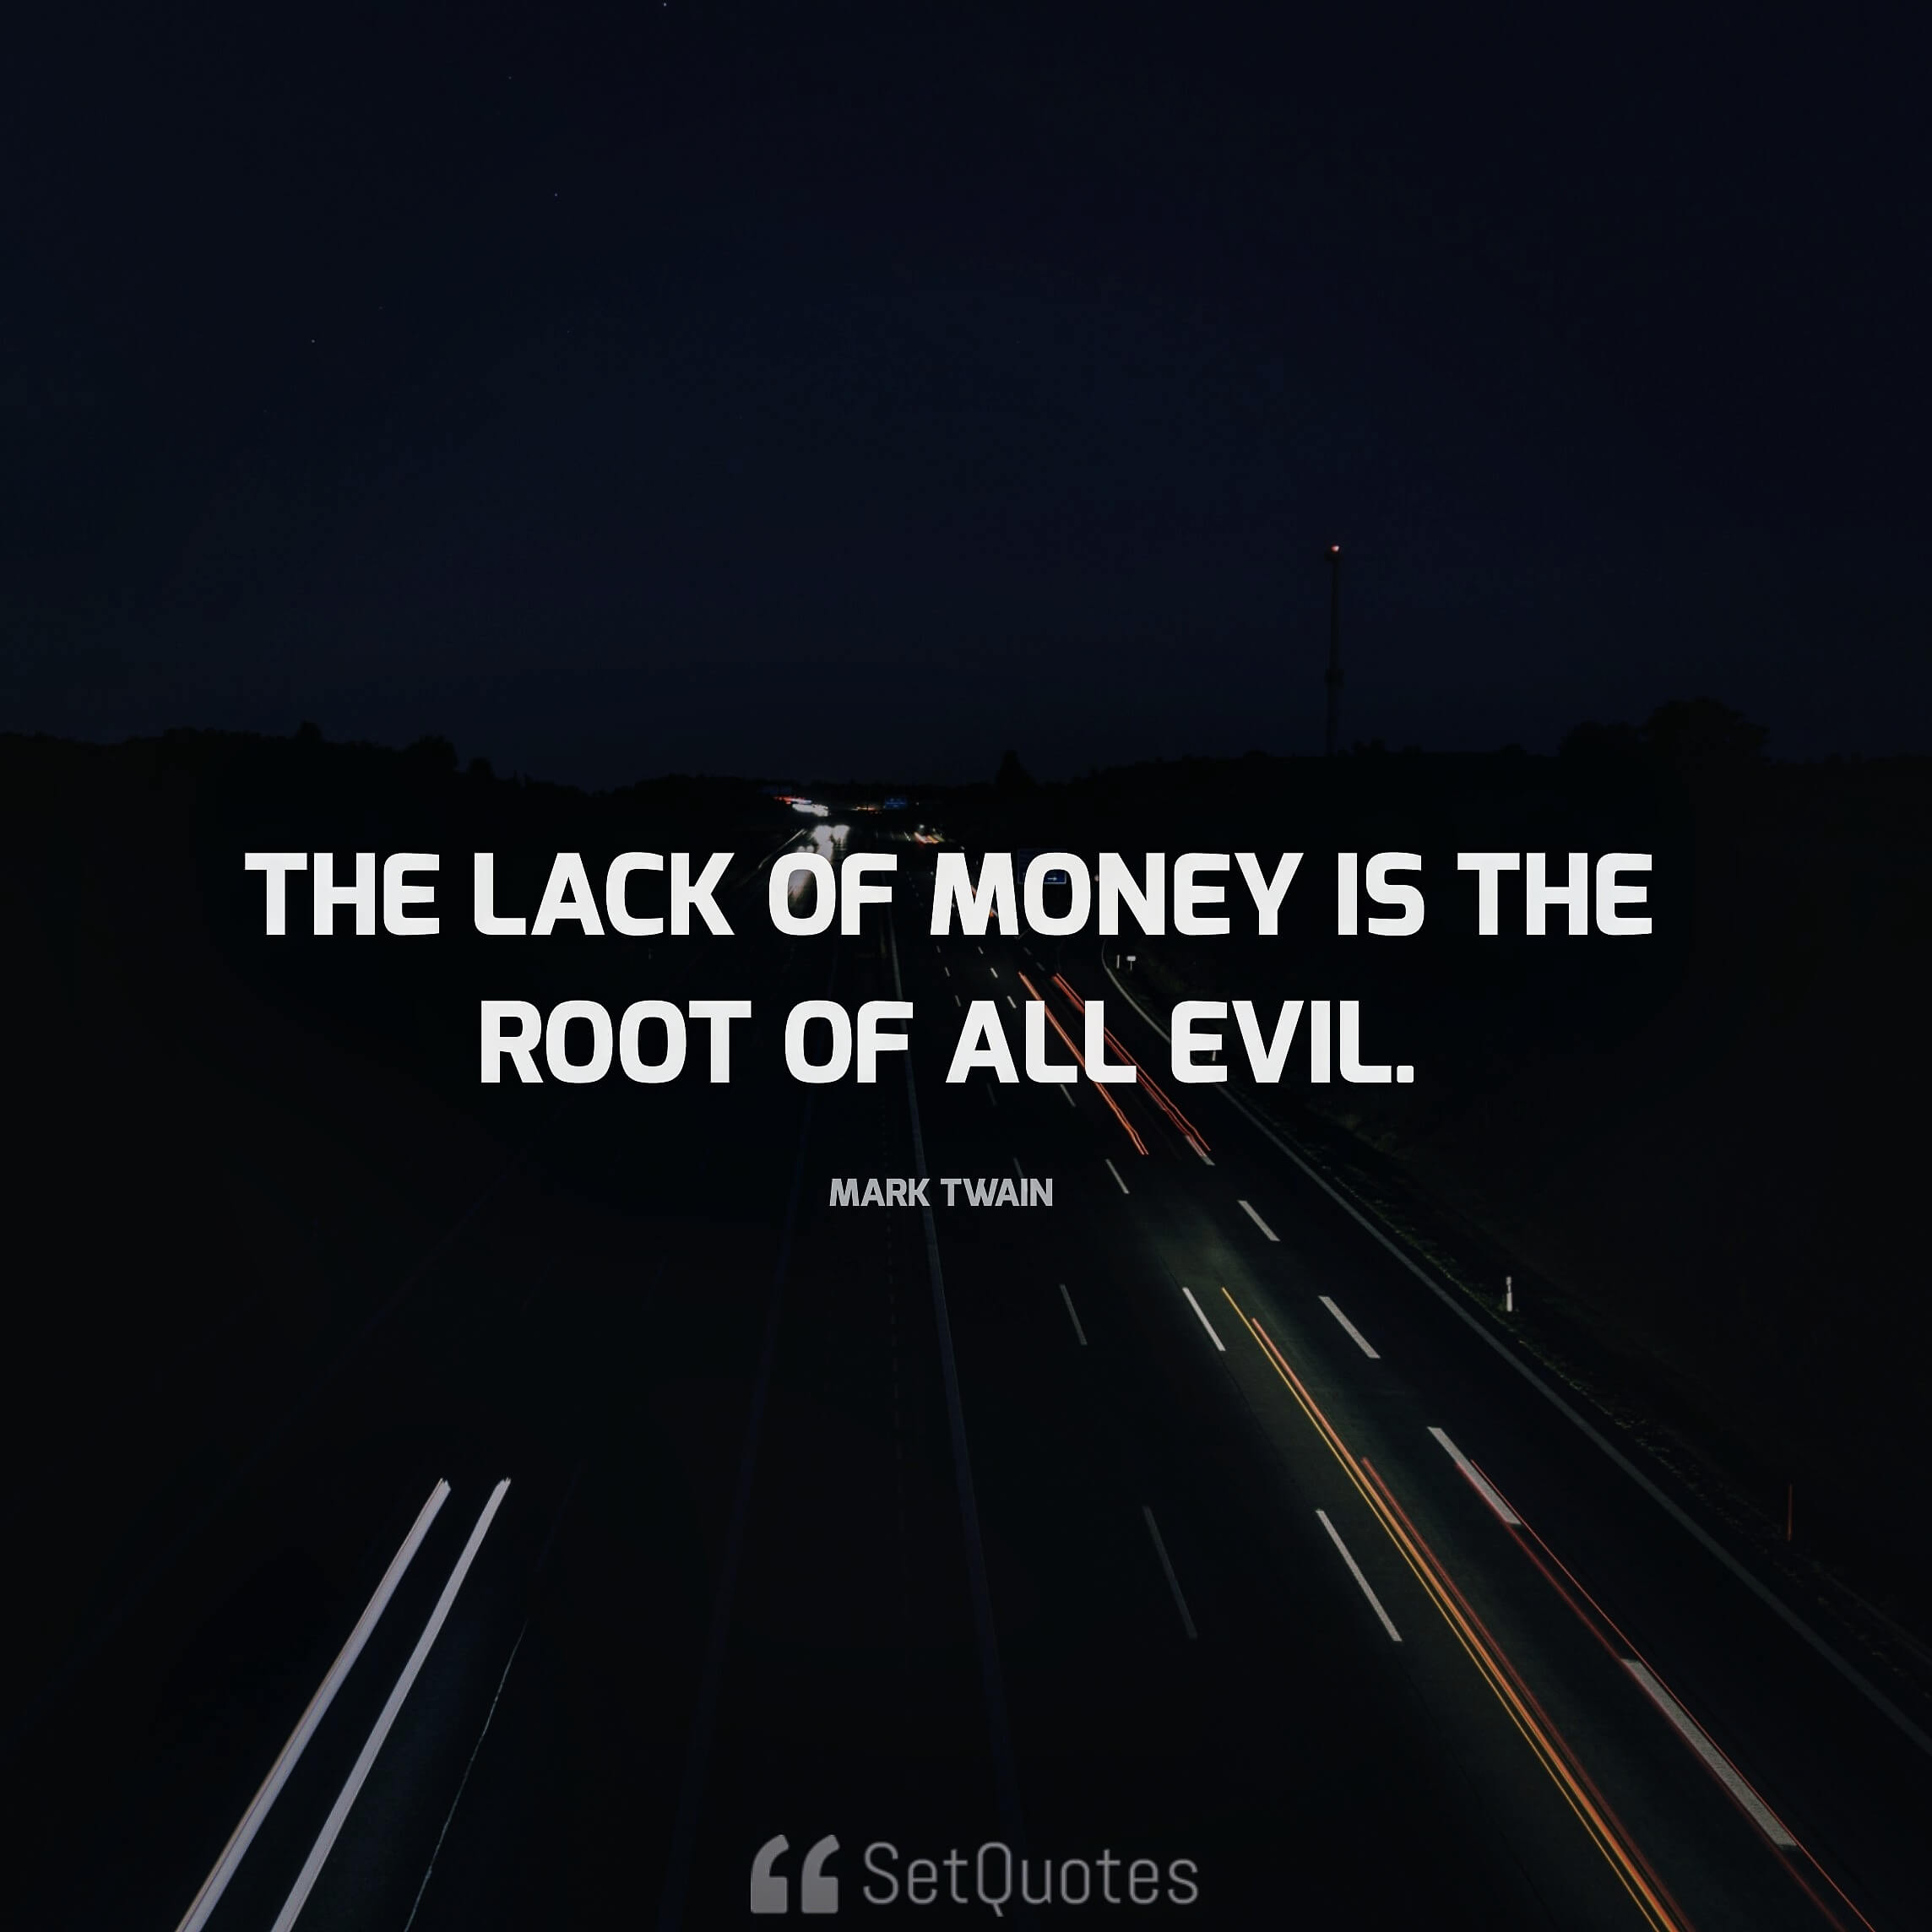 The lack of money is the root of all evil - SetQuotes